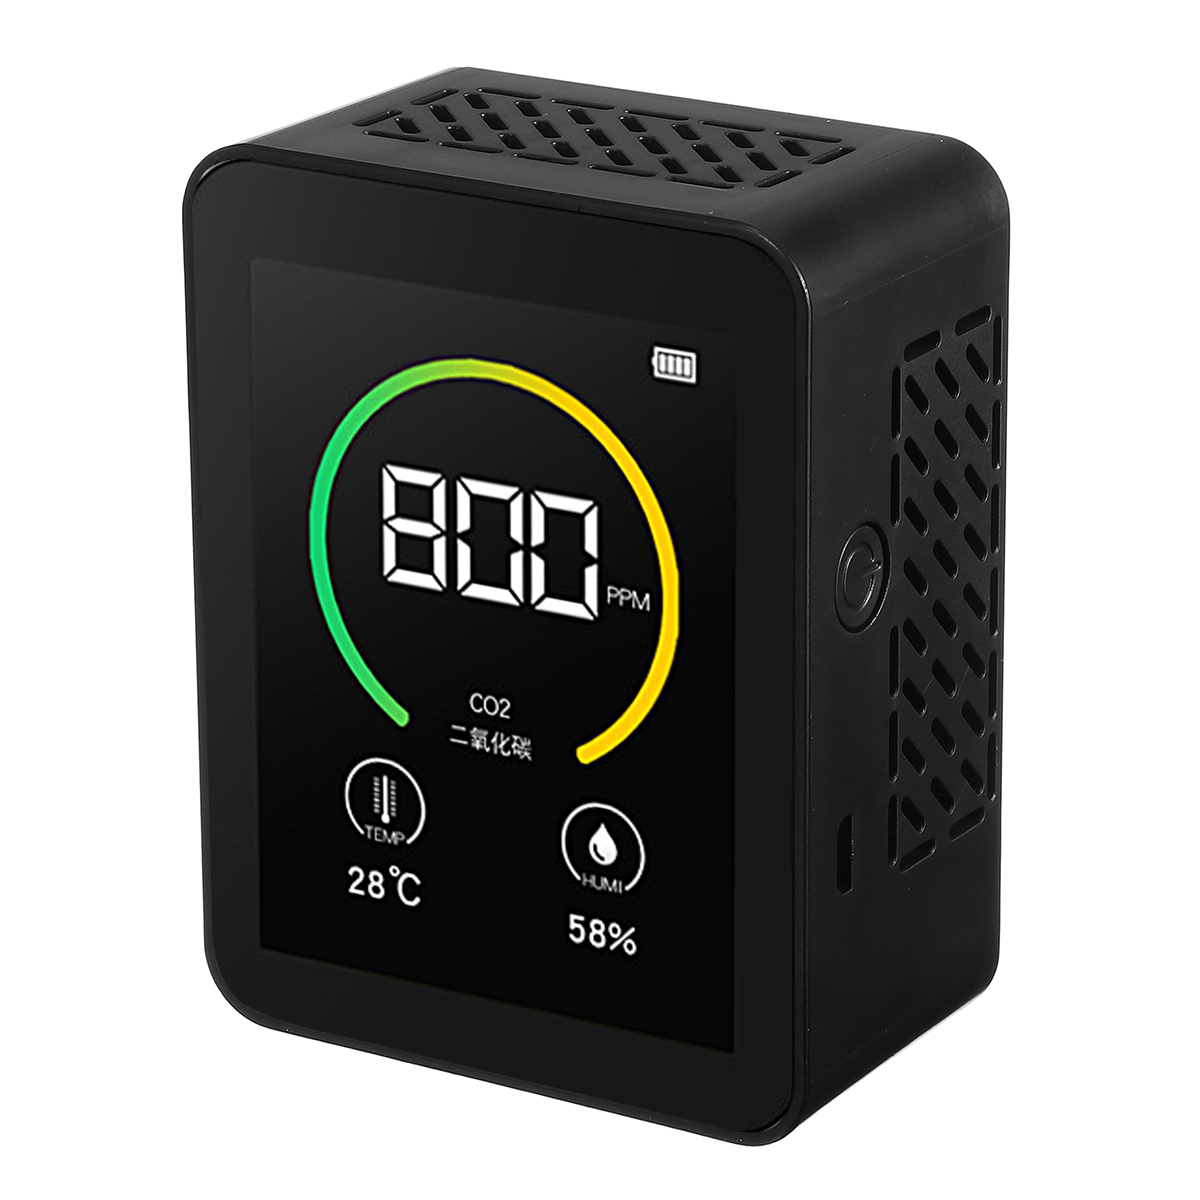 Find Gas Co2 Sensor Detector Air Quality Monitor Analyzer W/ Temperature Humidity Display for Sale on Gipsybee.com with cryptocurrencies